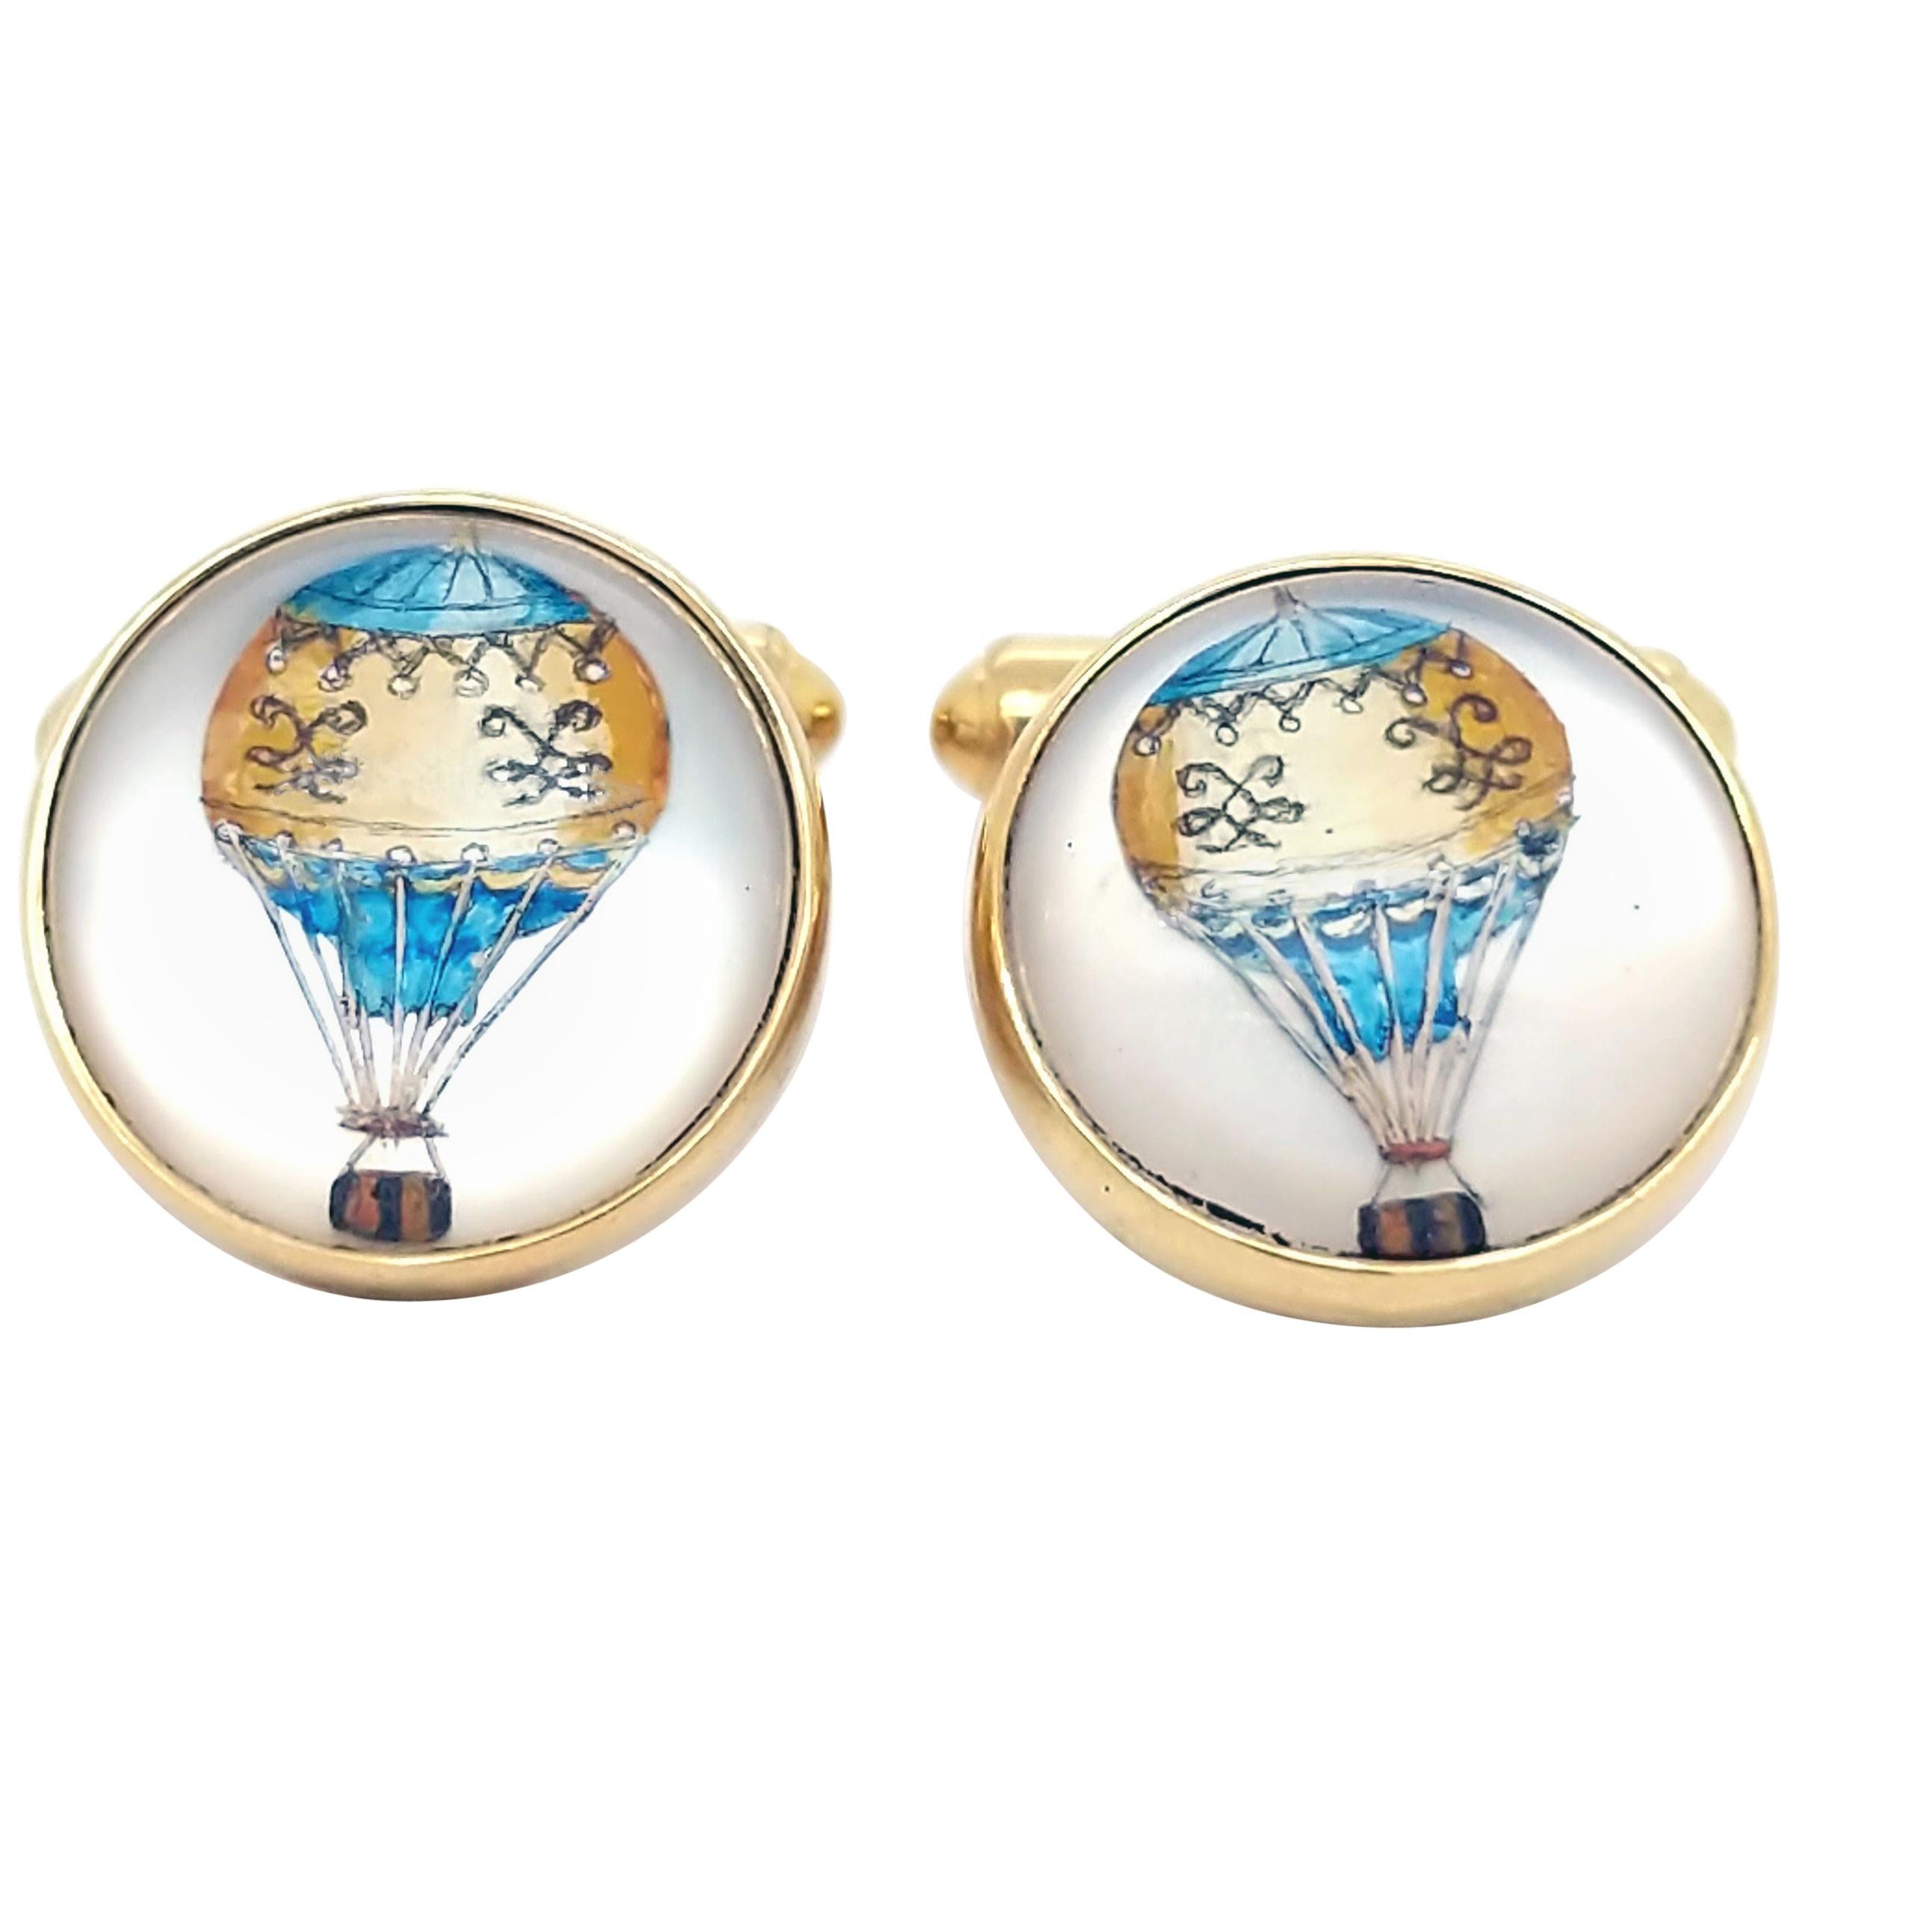 These cufflinks are adorable! Made of 18K yellow gold and hand-painted crystal, these cufflinks are sure to bring you handfuls of compliments! The hot air balloon in these cufflinks are lovely shades of yellow and blue, and they are sure to excite